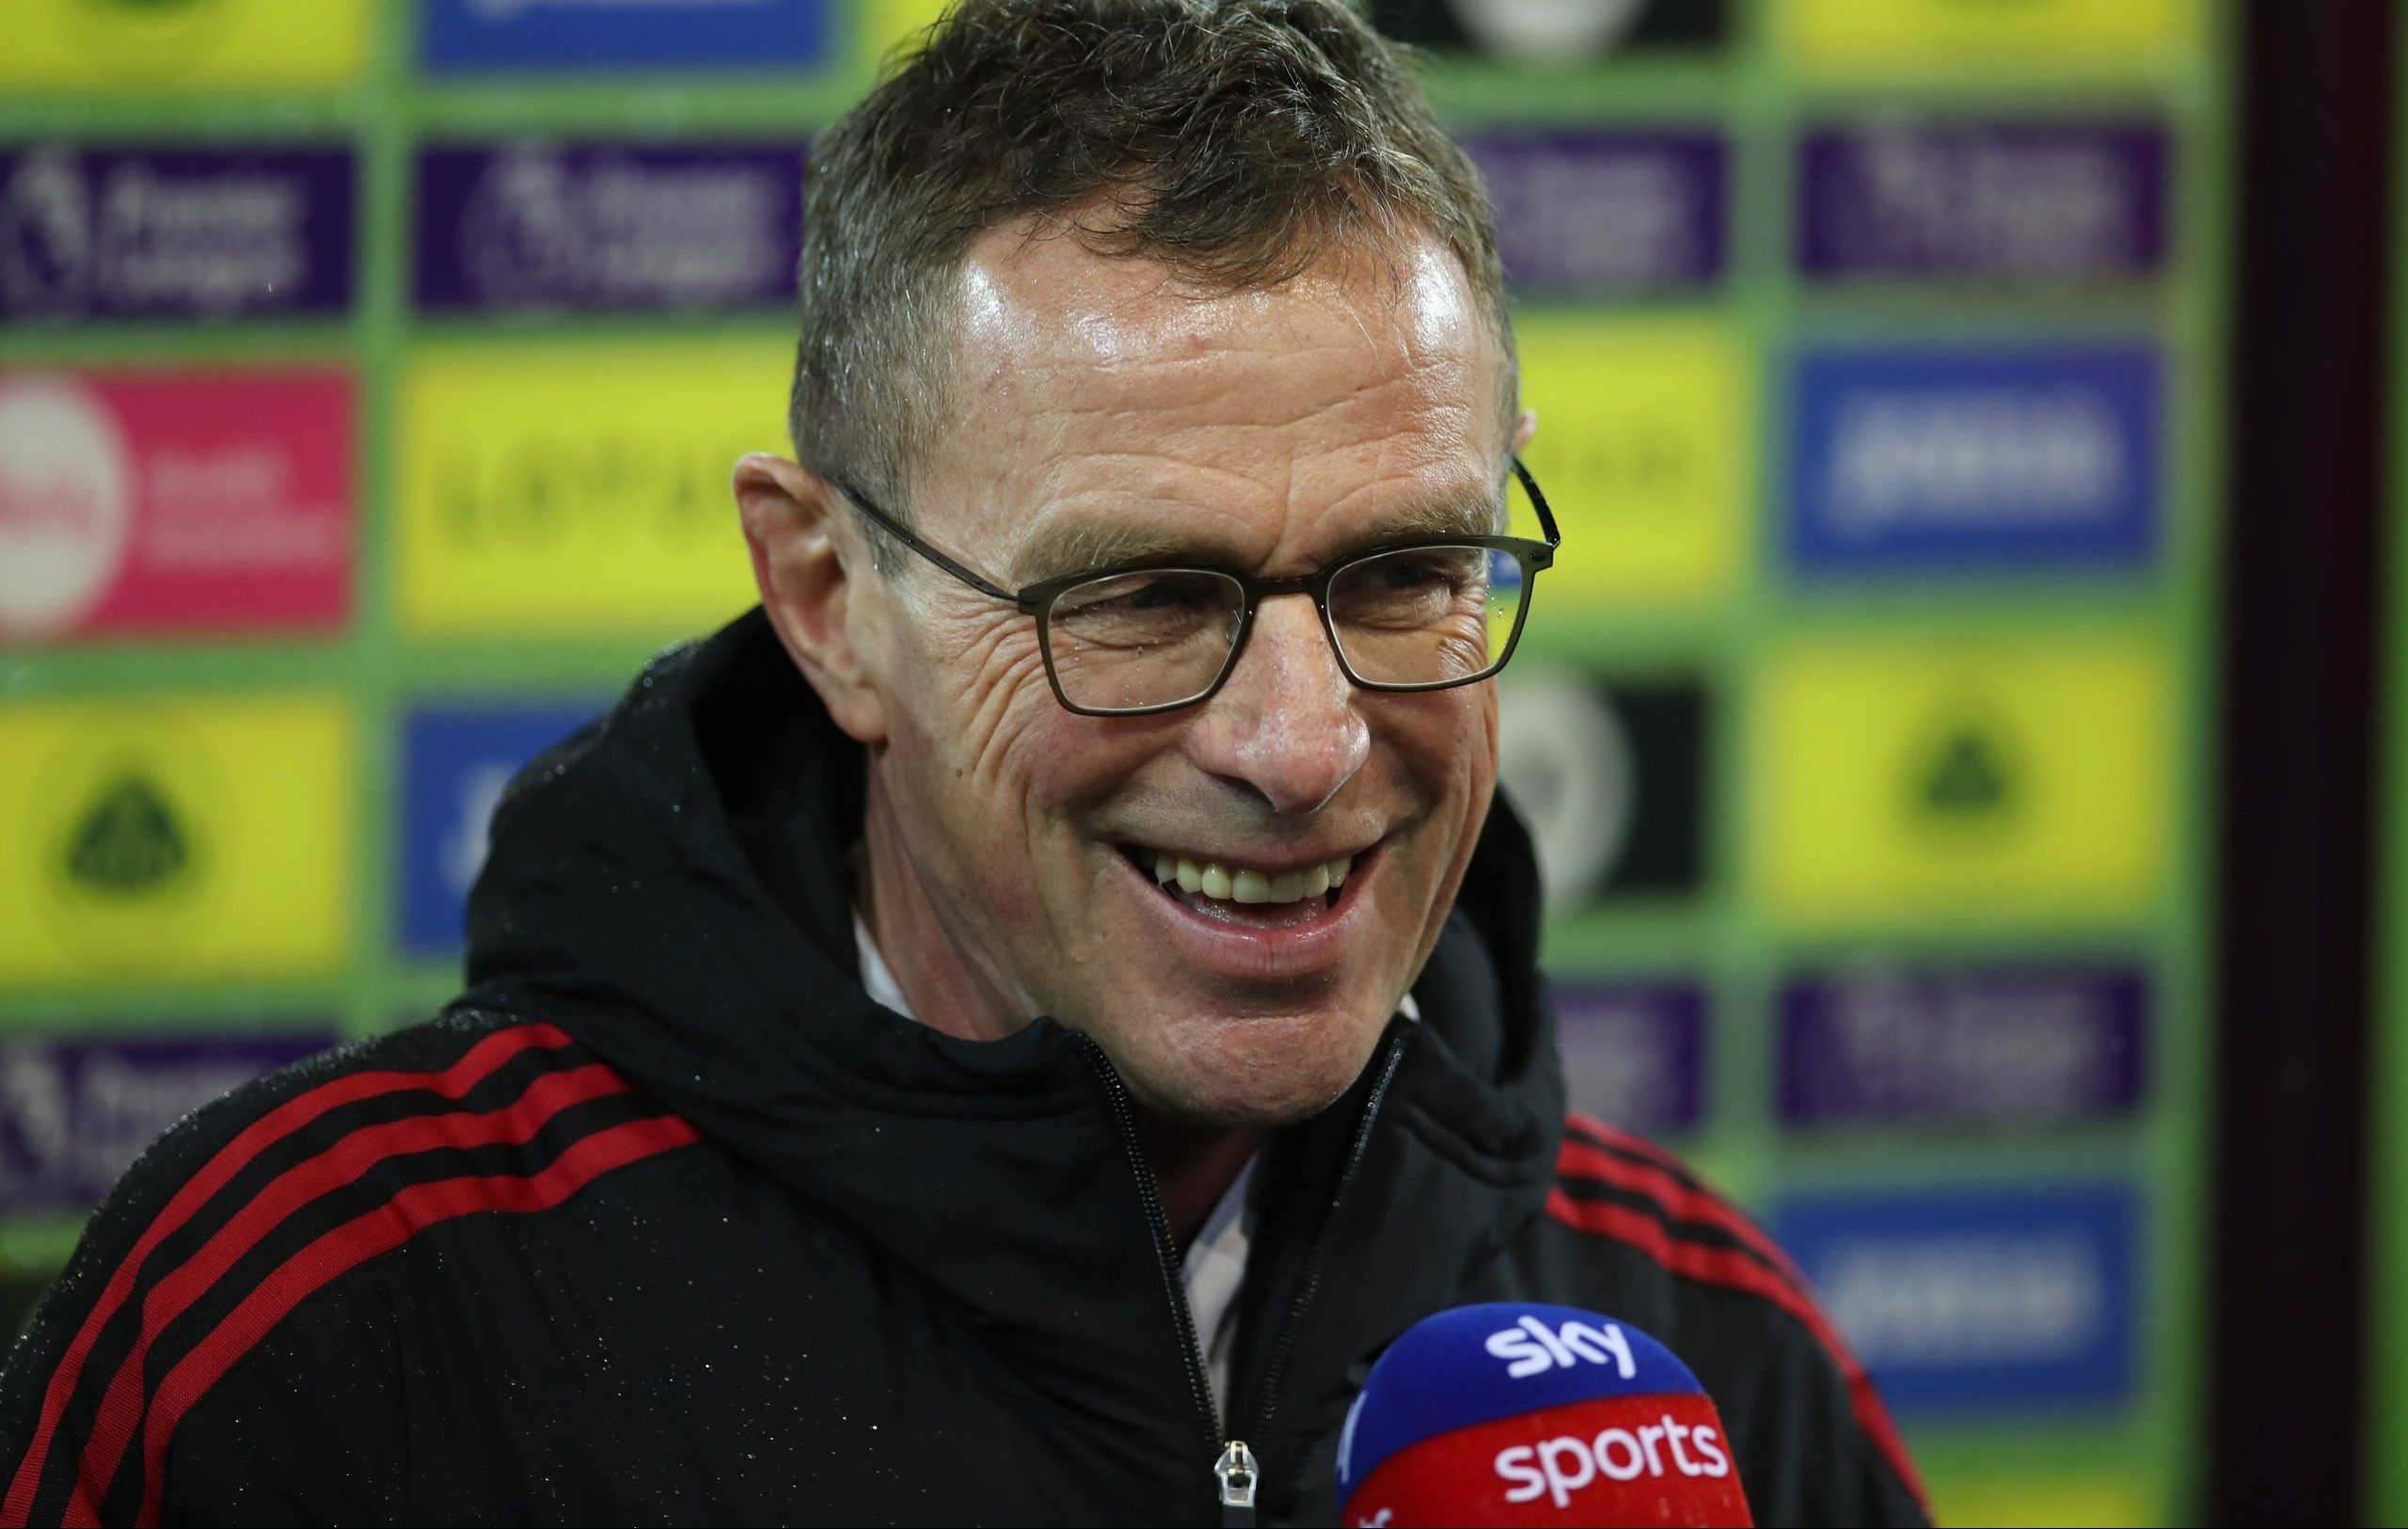 Soccer Football - Premier League - Norwich City v Manchester United - Carrow Road, Norwich, Britain - December 11, 2021 Manchester United interim manager Ralf Rangnick during an interview before the match REUTERS/Chris Radburn EDITORIAL USE ONLY. No use with unauthorized audio, video, data, fixture lists, club/league logos or 'live' services. Online in-match use limited to 75 images, no video emulation. No use in betting, games or single club /league/player publications.  Please contact your acc